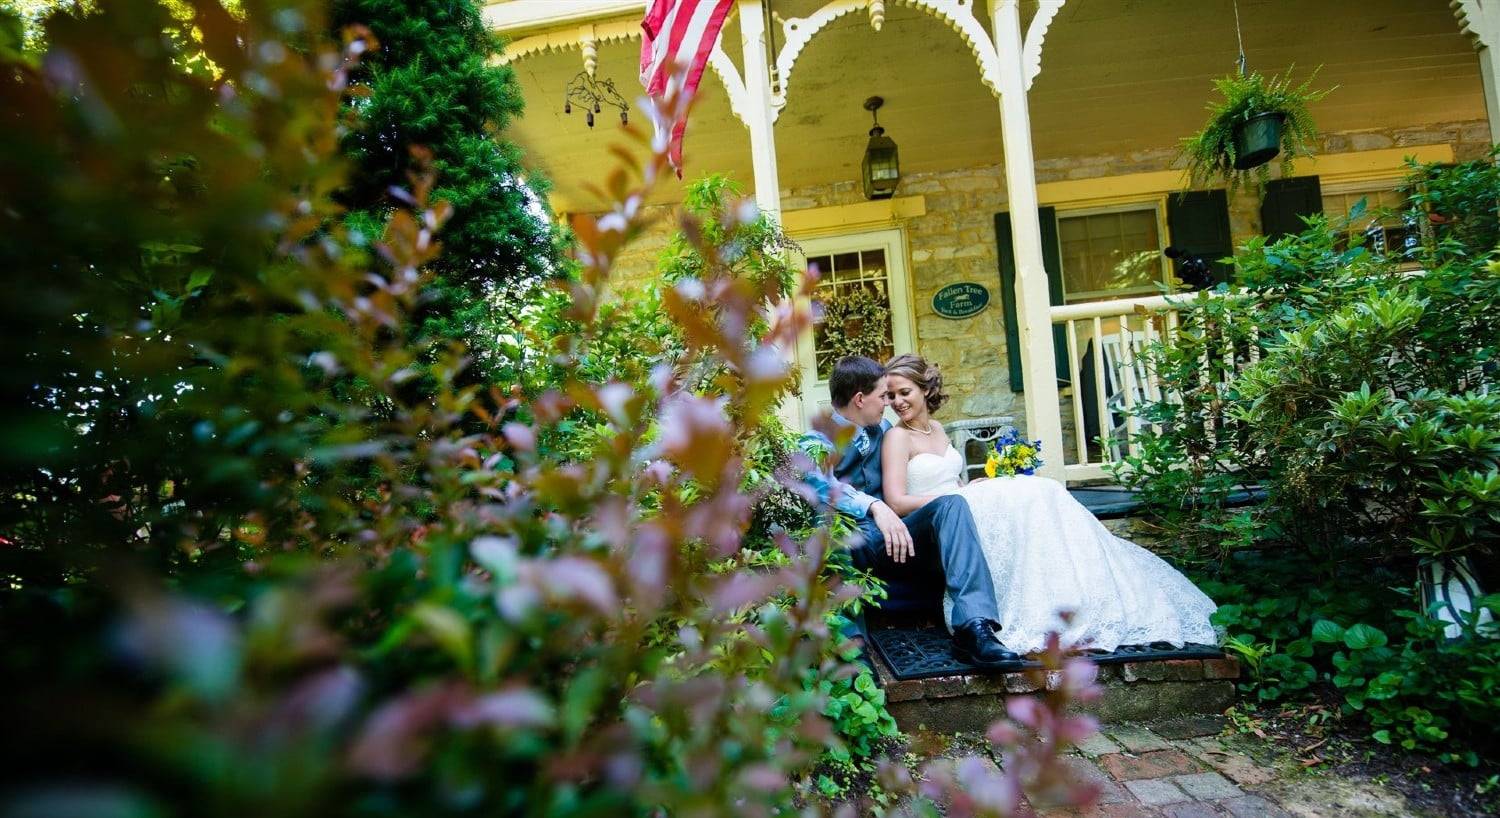 View through trees of a bride and groom sitting on a front porch of a home